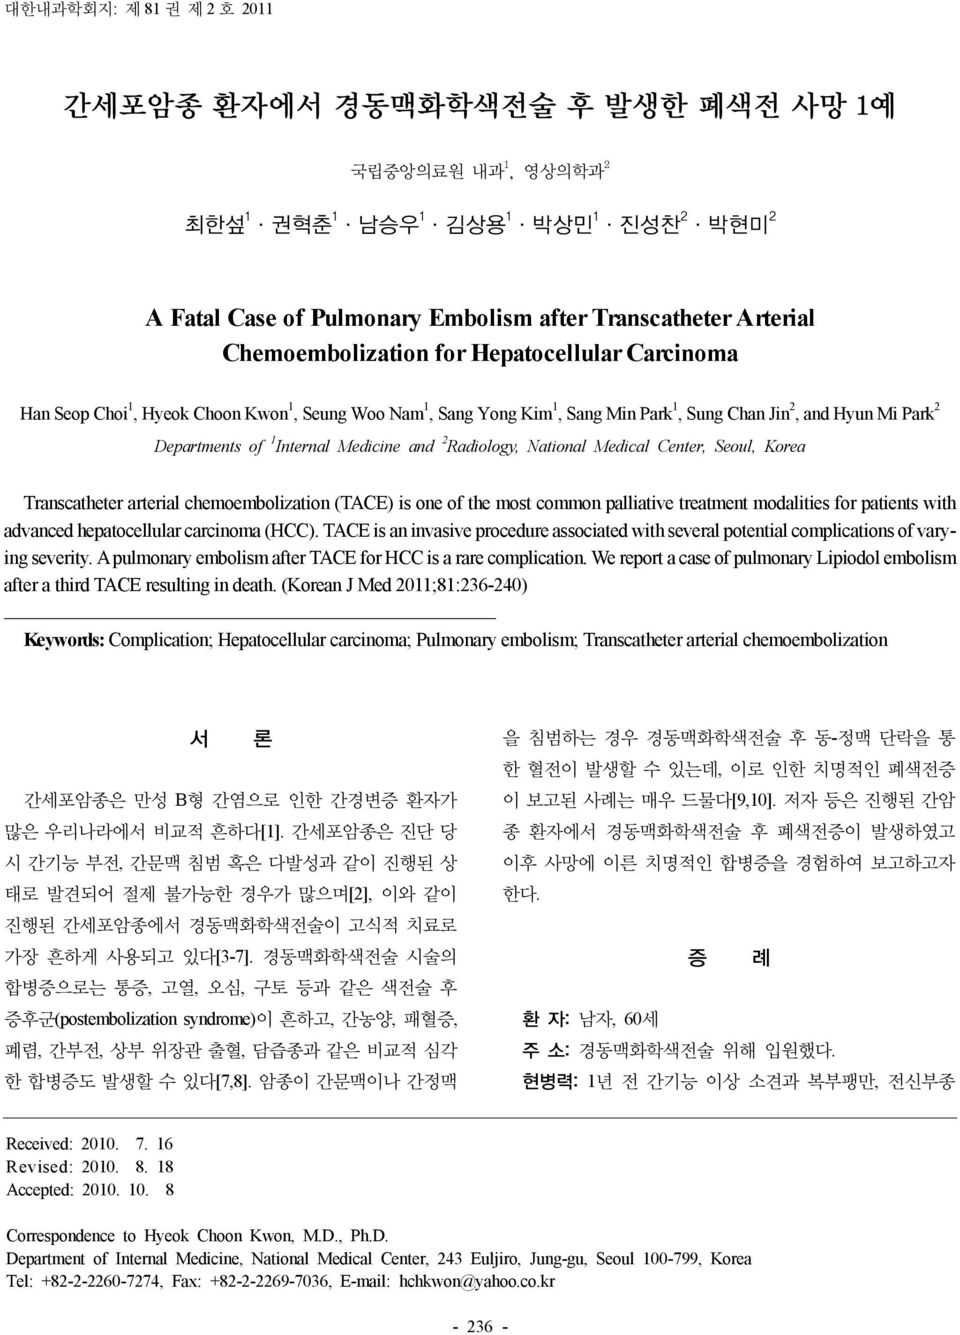 Medicine and 2 Radiology, National Medical Center, Seoul, Korea Transcatheter arterial chemoembolization (TACE) is one of the most common palliative treatment modalities for patients with advanced